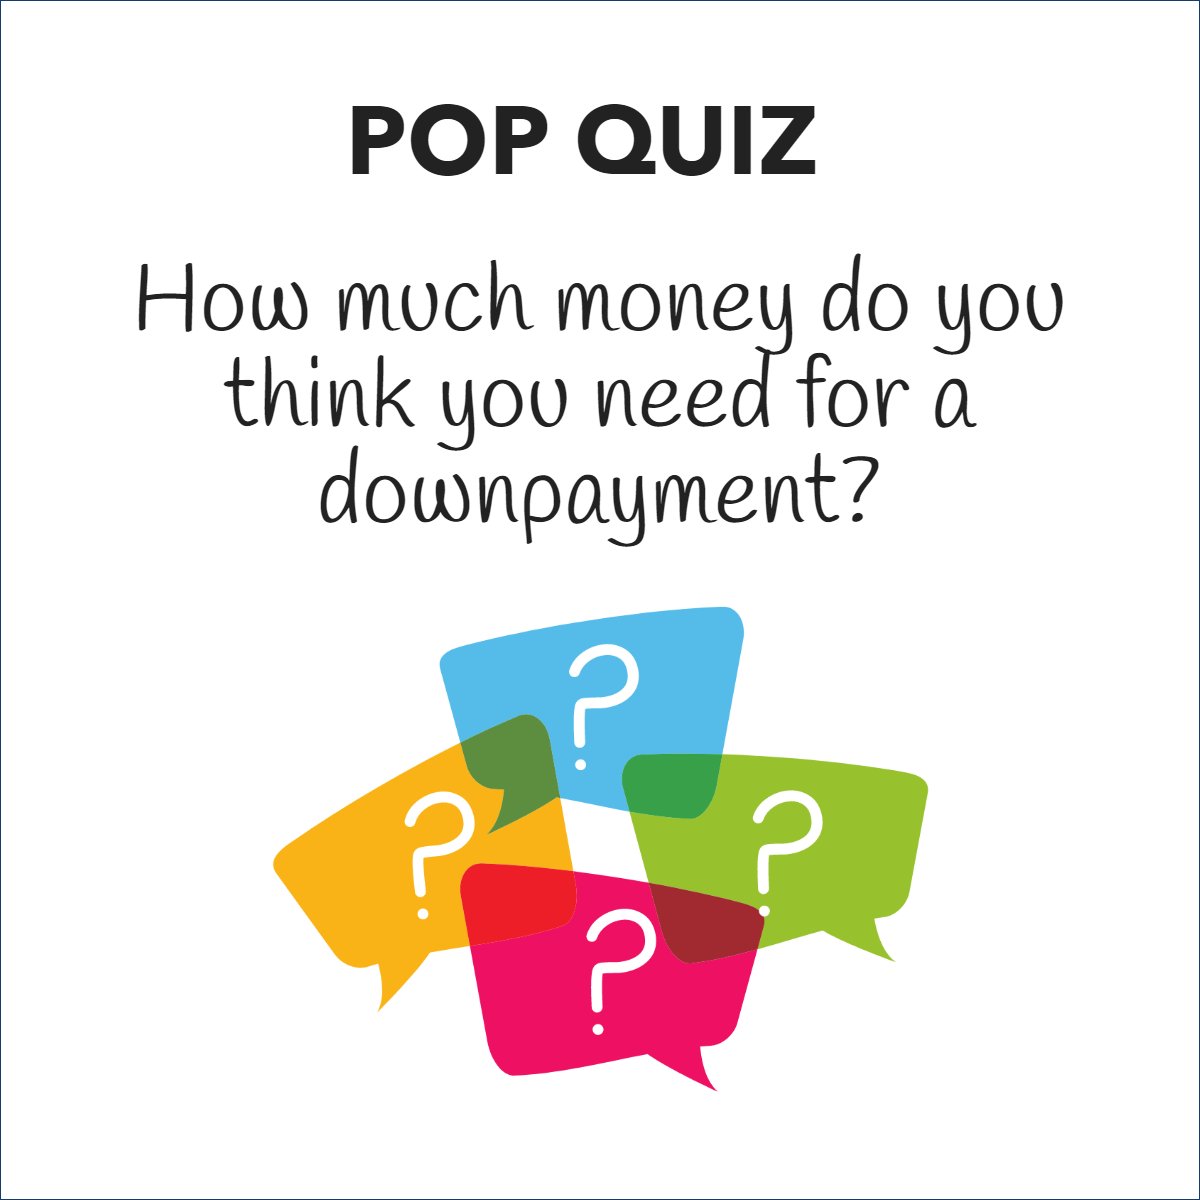 Fast Fact:

While a 20% down payment was once the standard, many homebuyers now pay 5% or less. 💰

#realestate #realestatetips #downpayment #downpaymentassistance #popquiz #realestate101
 #L2L